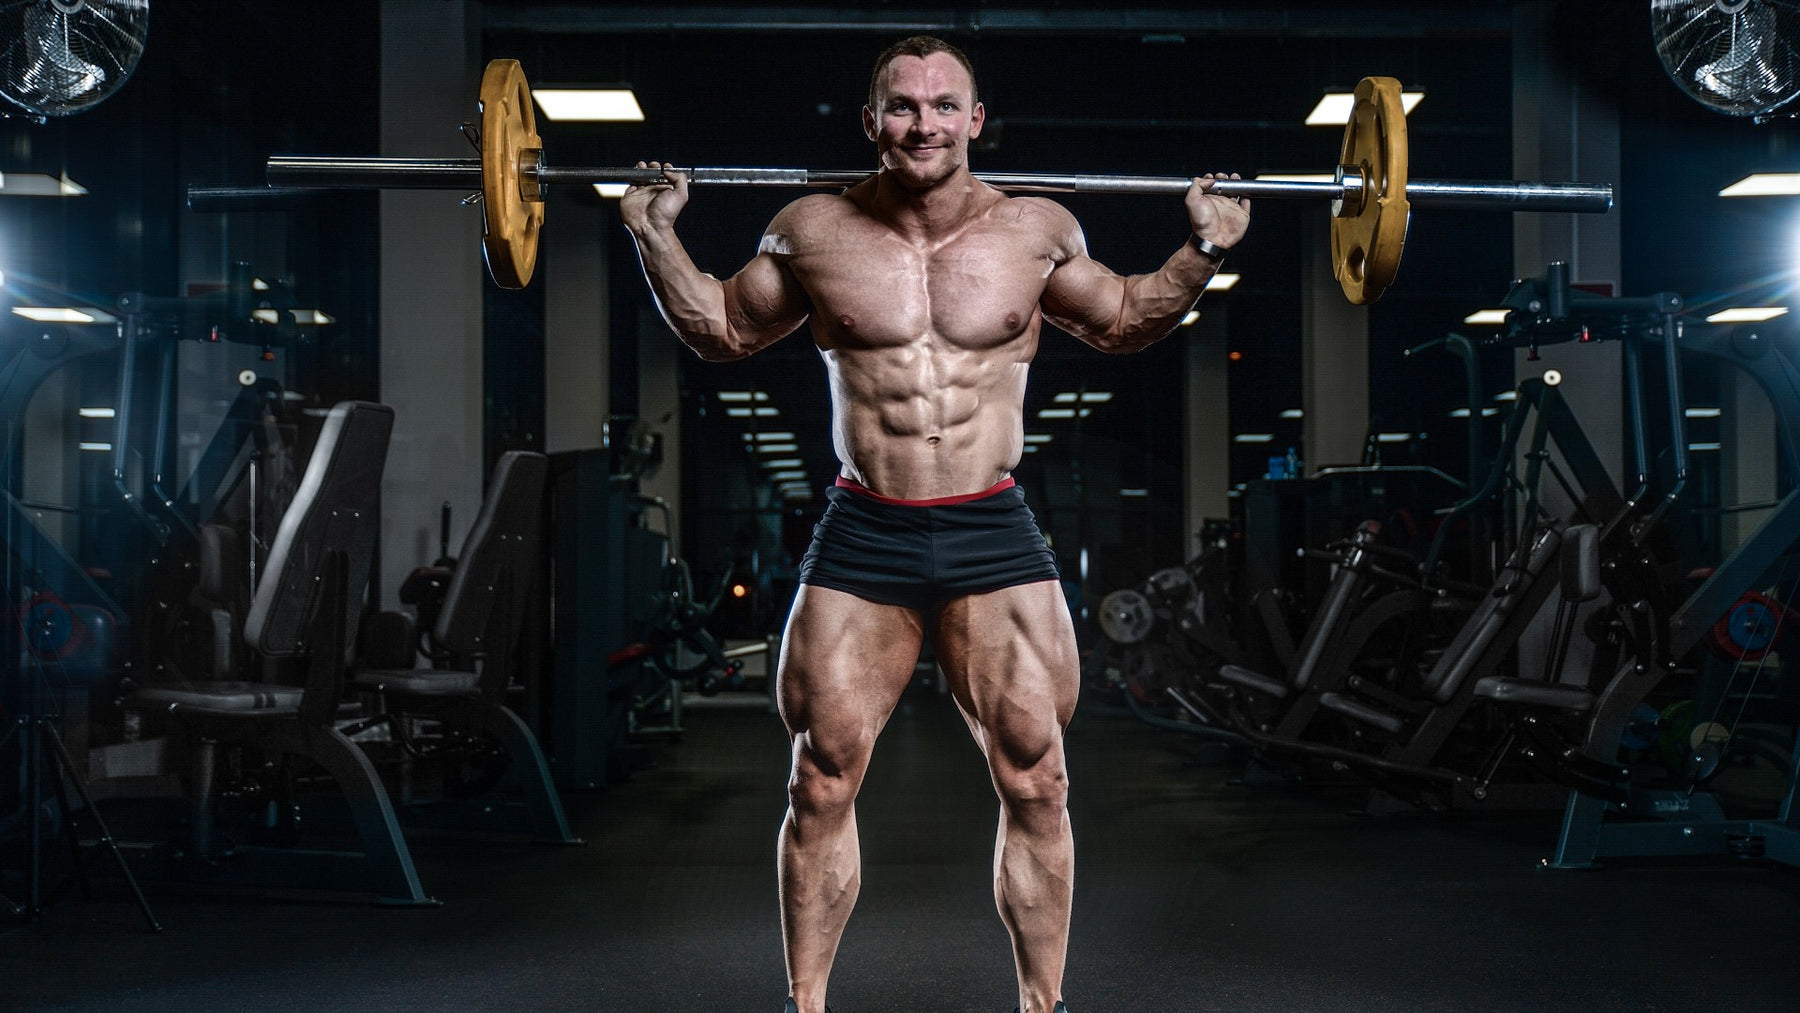 Leg Workout - Building Big Legs One at a Time